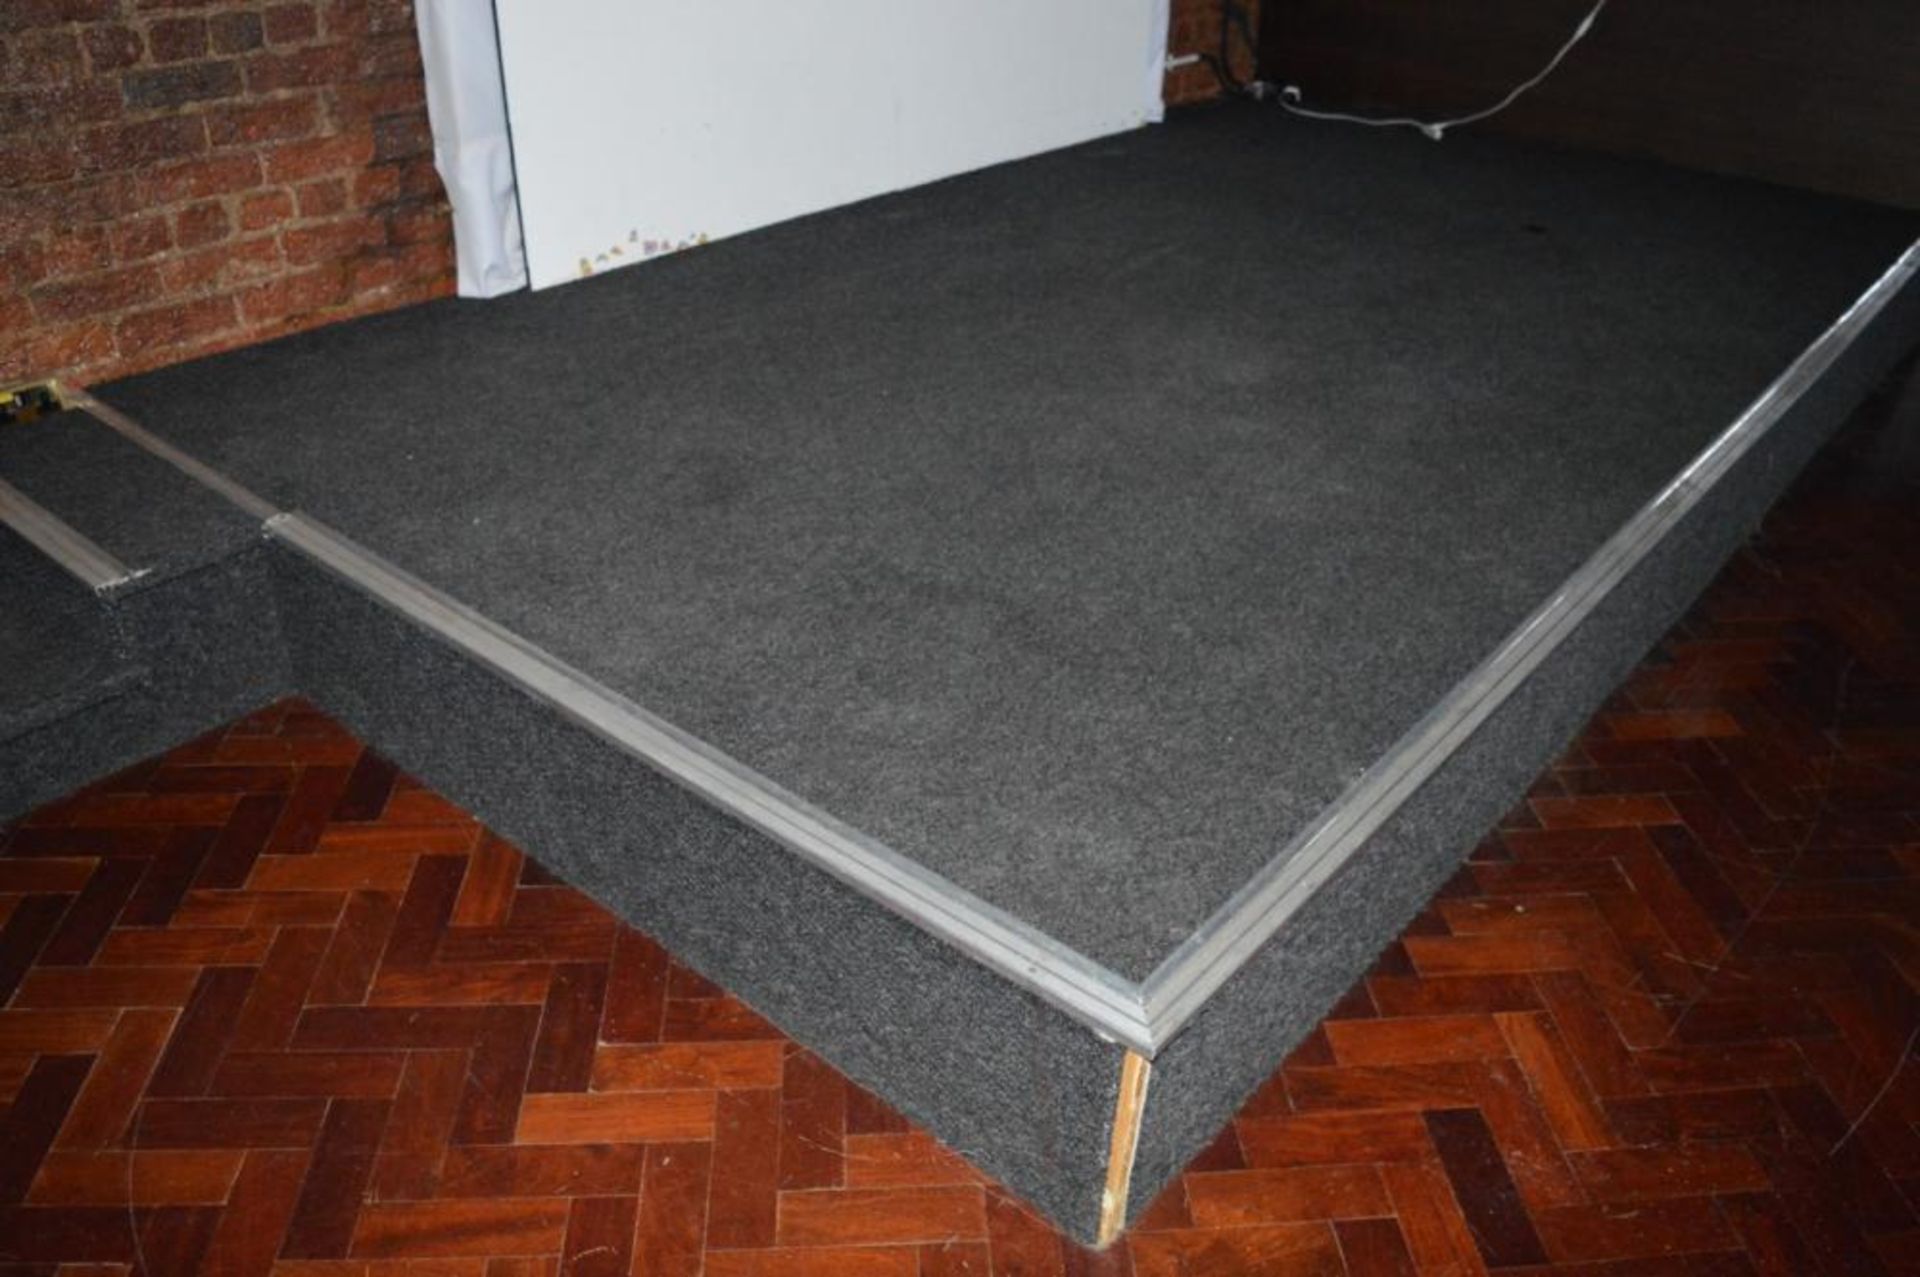 1 x Carpeted Stage Platform With Overhead Suspended Illuminated Cover and Access Steps - Platform Di - Image 3 of 9